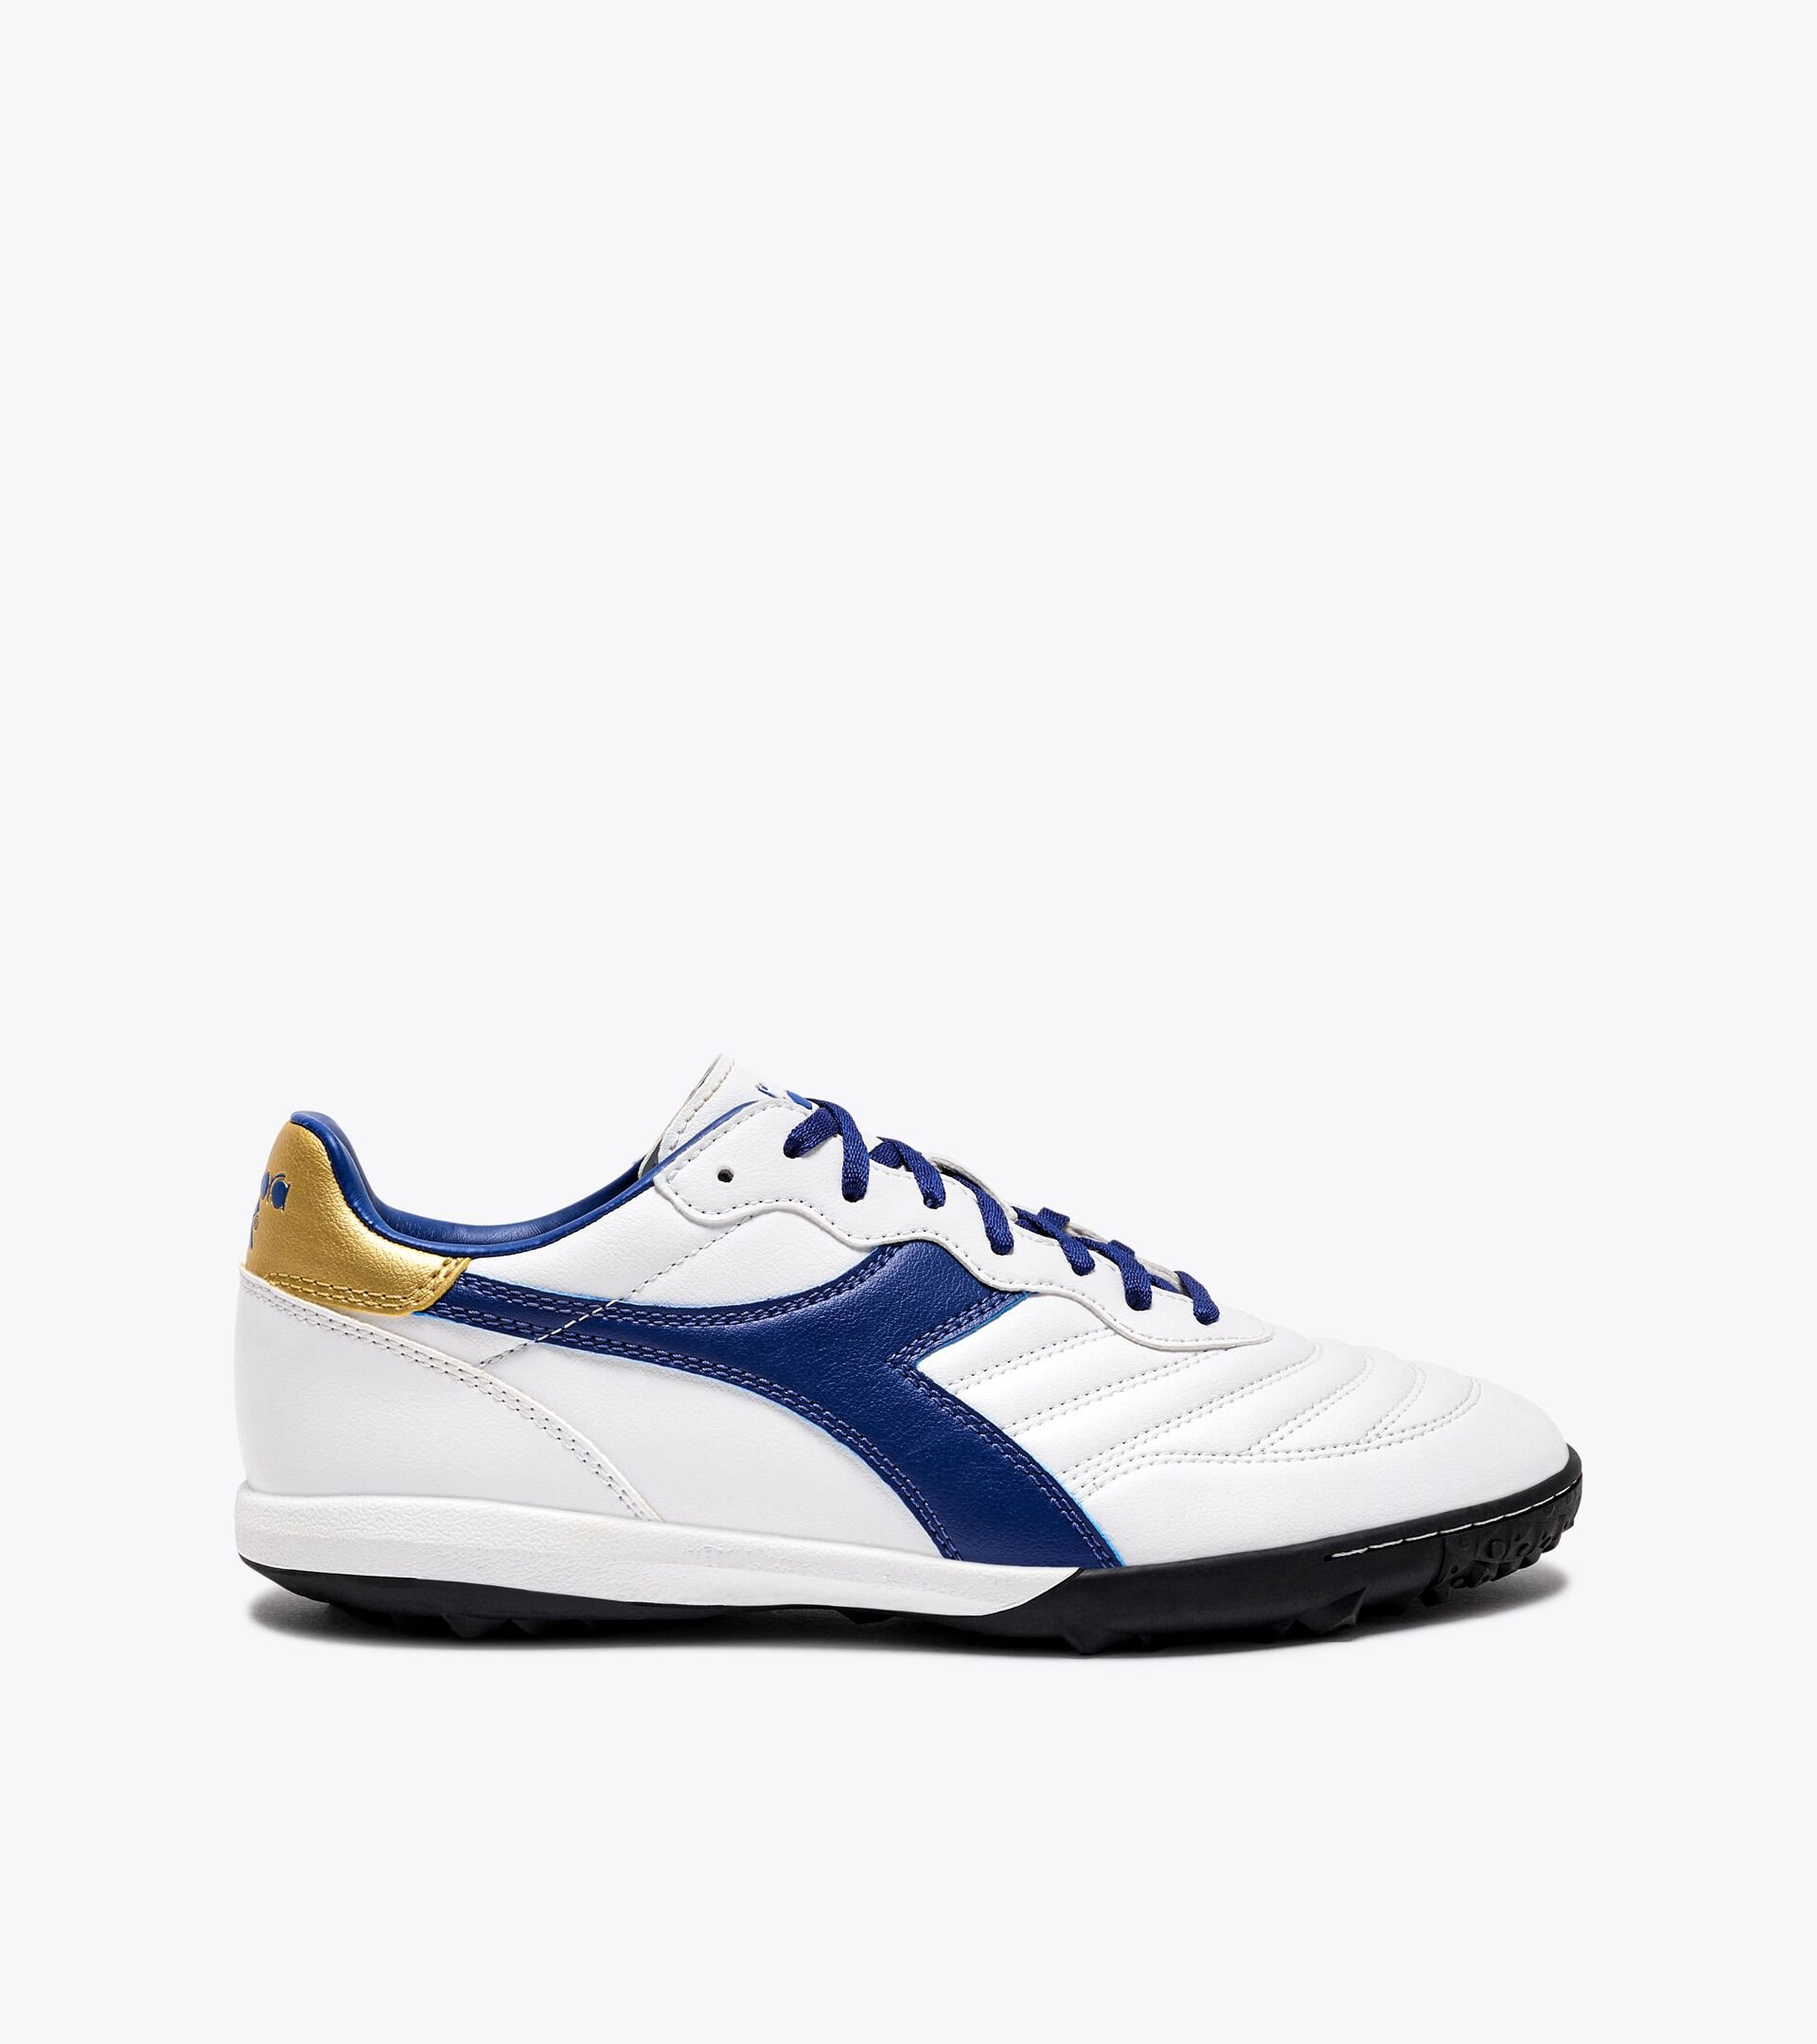 Calcio boots for synthetic turfs or firm grounds - Men BRASIL 2 R TFR WHITE/MAZARINE BLUE/GOLD - Diadora